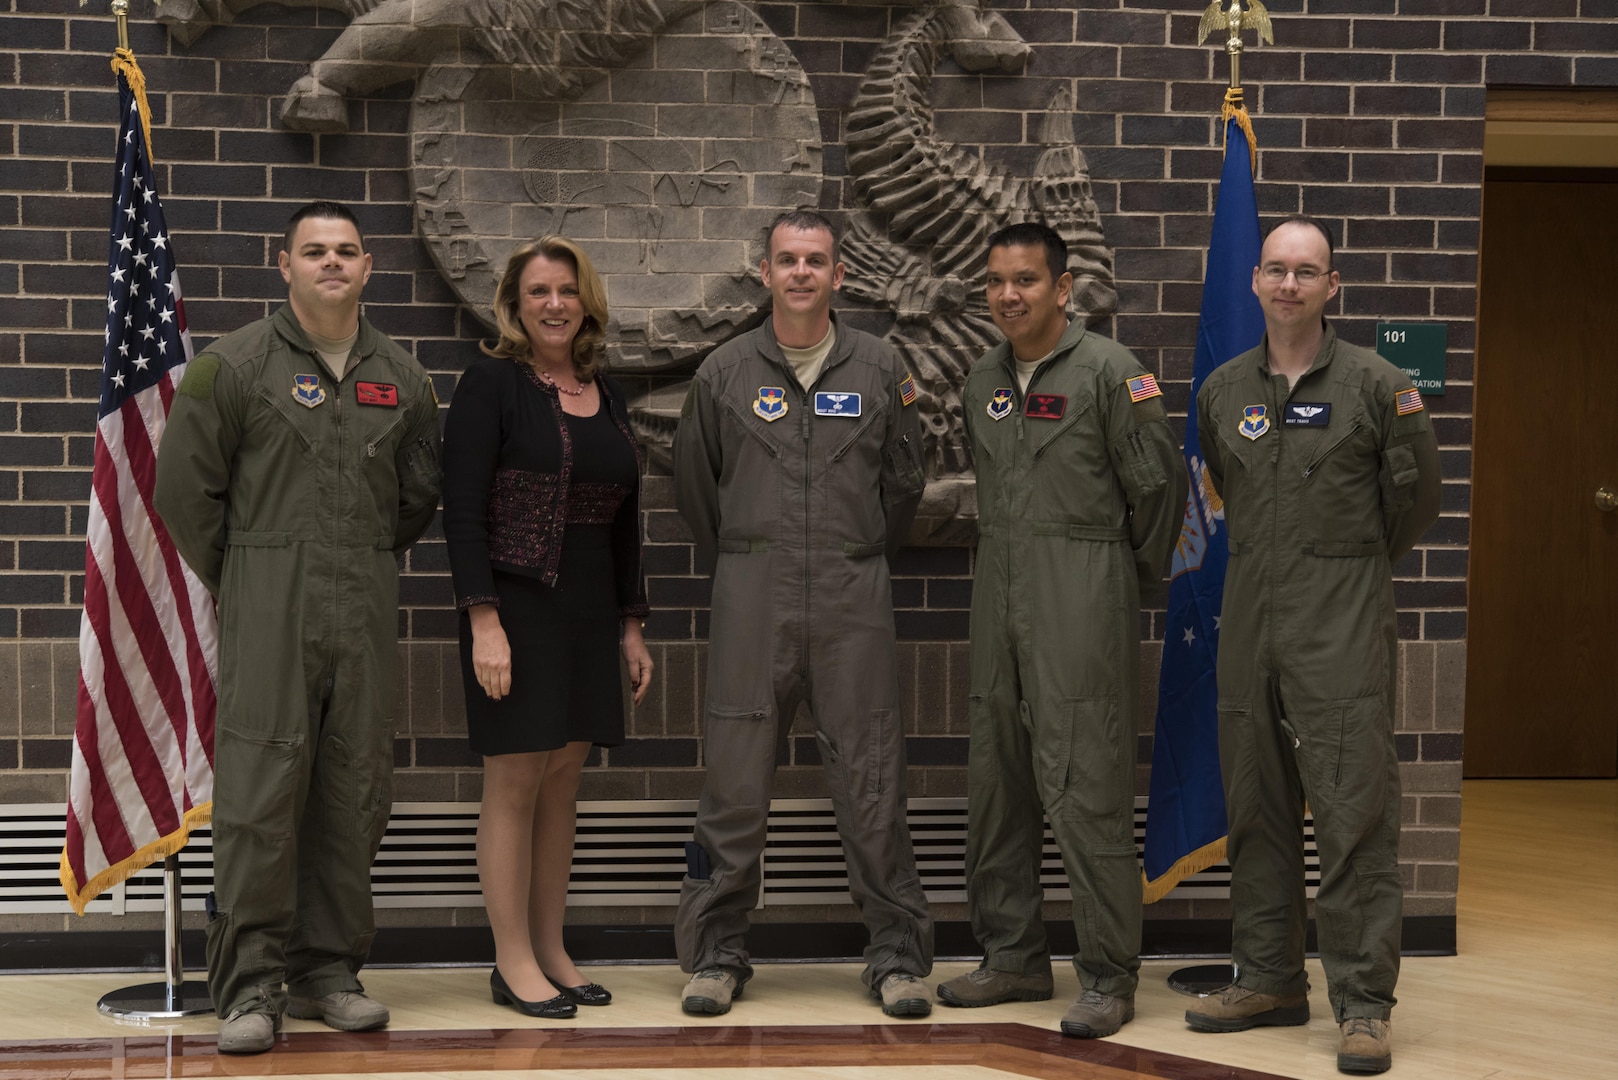 Secretary of the Air Force Deborah Lee James poses with the first four Enlisted Pilot Initial Class students in the U.S. Air Force Initial Flight Training School at Pueblo Memorial Airport in Pueblo, Colorado Oct. 17. The Air Force announced the initiative to integrate the enlisted force into Remotely Piloted Aircraft flying operations as pilots Dec. 17, 2015 starting with the RQ-4 Global Hawk. Name badges were blurred due to Air Force limits on disclosure of identifying information for RPA operators.